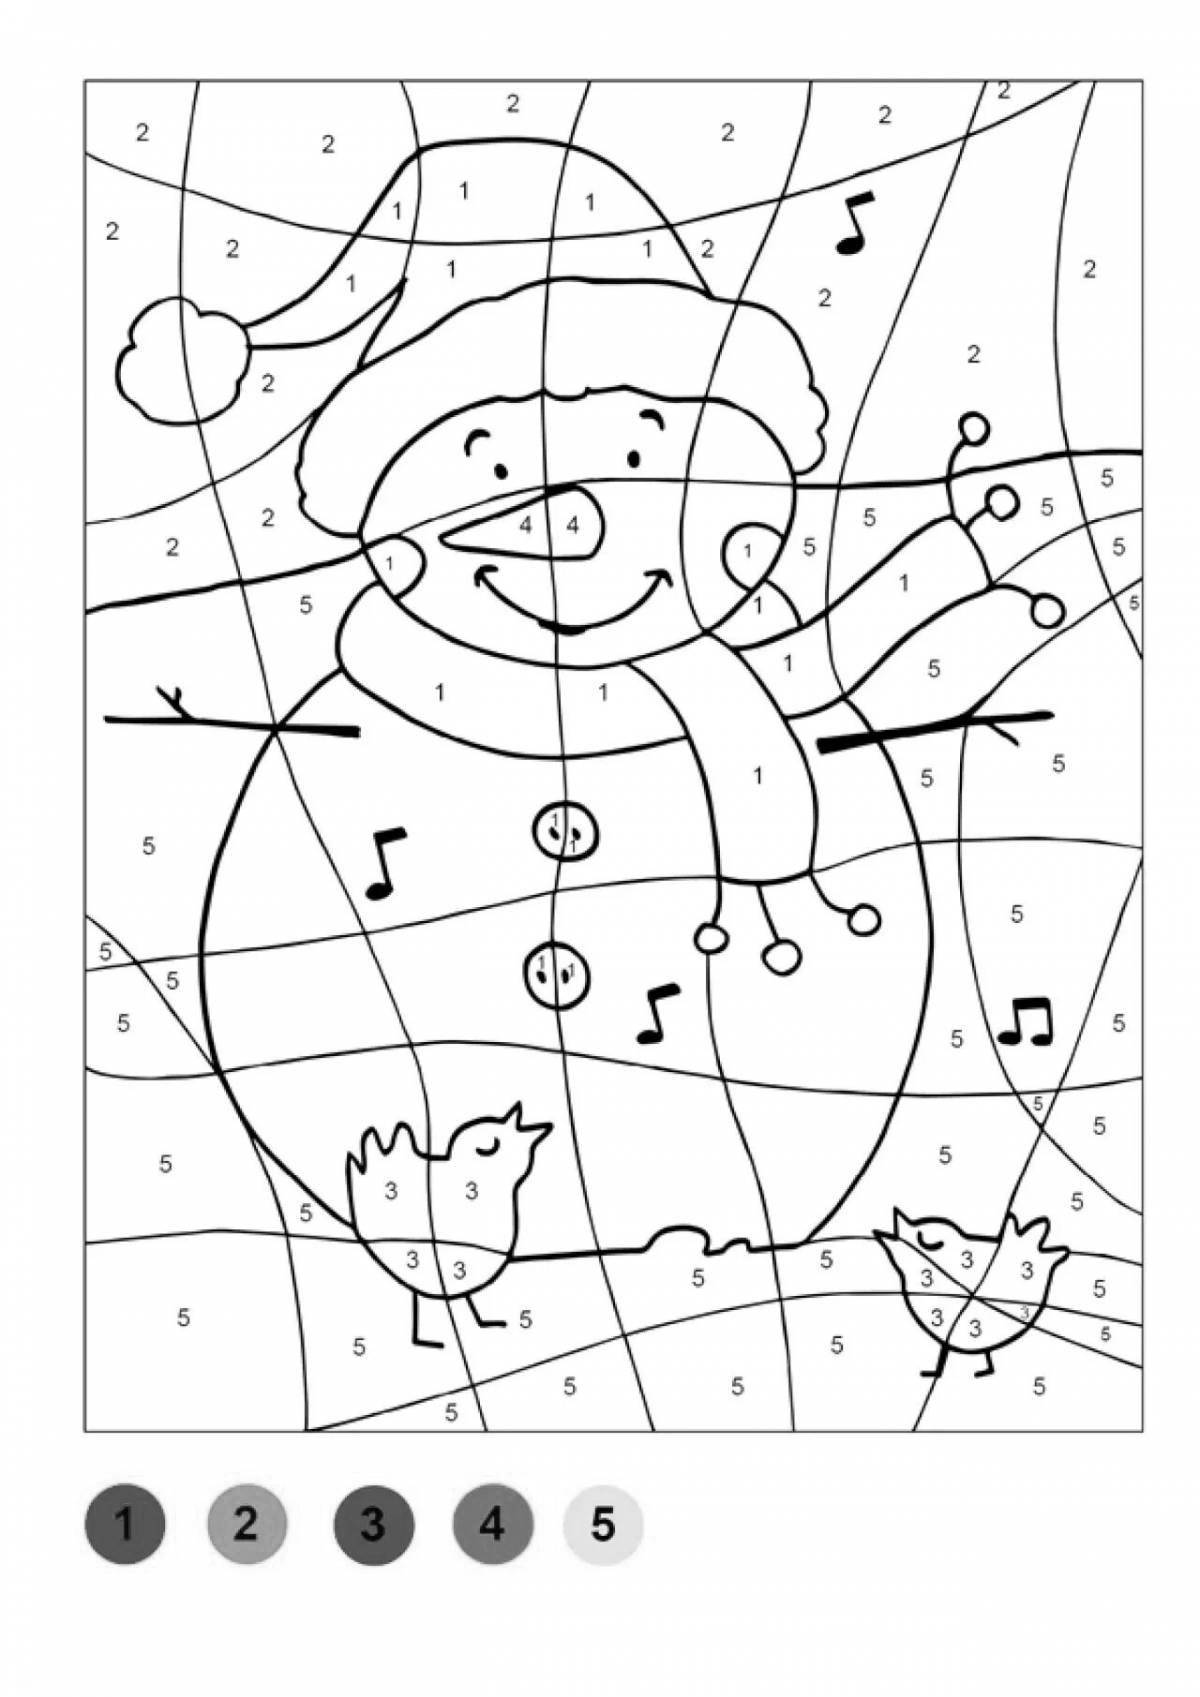 Happy New Year in numbers coloring page